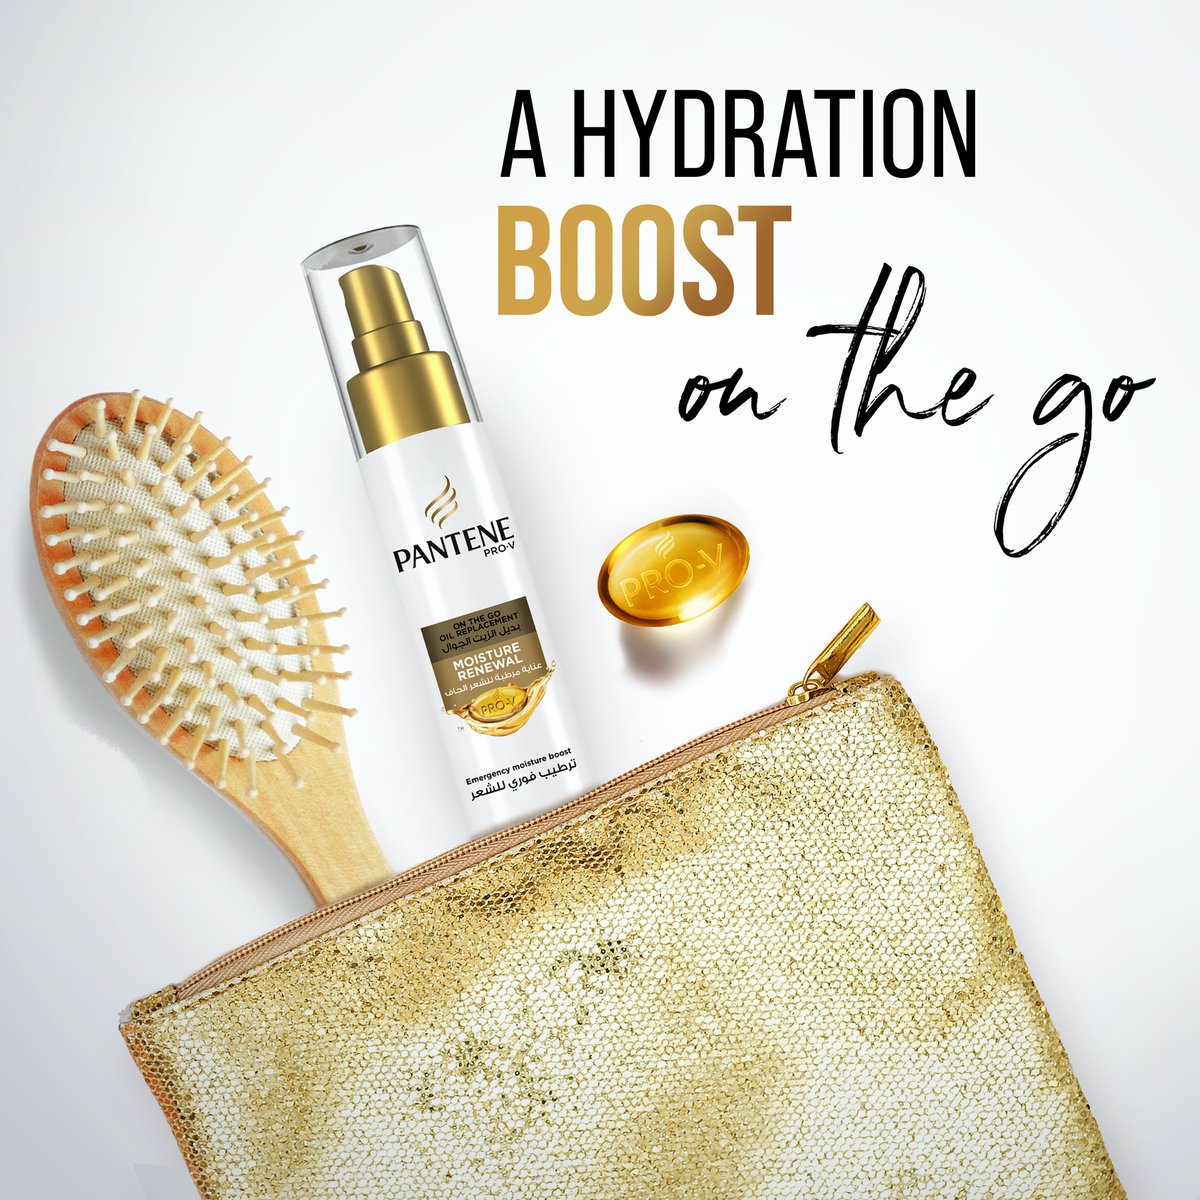 Pantene Pro-V Moisture Renewal On The Go Oil Replacement 75 ml